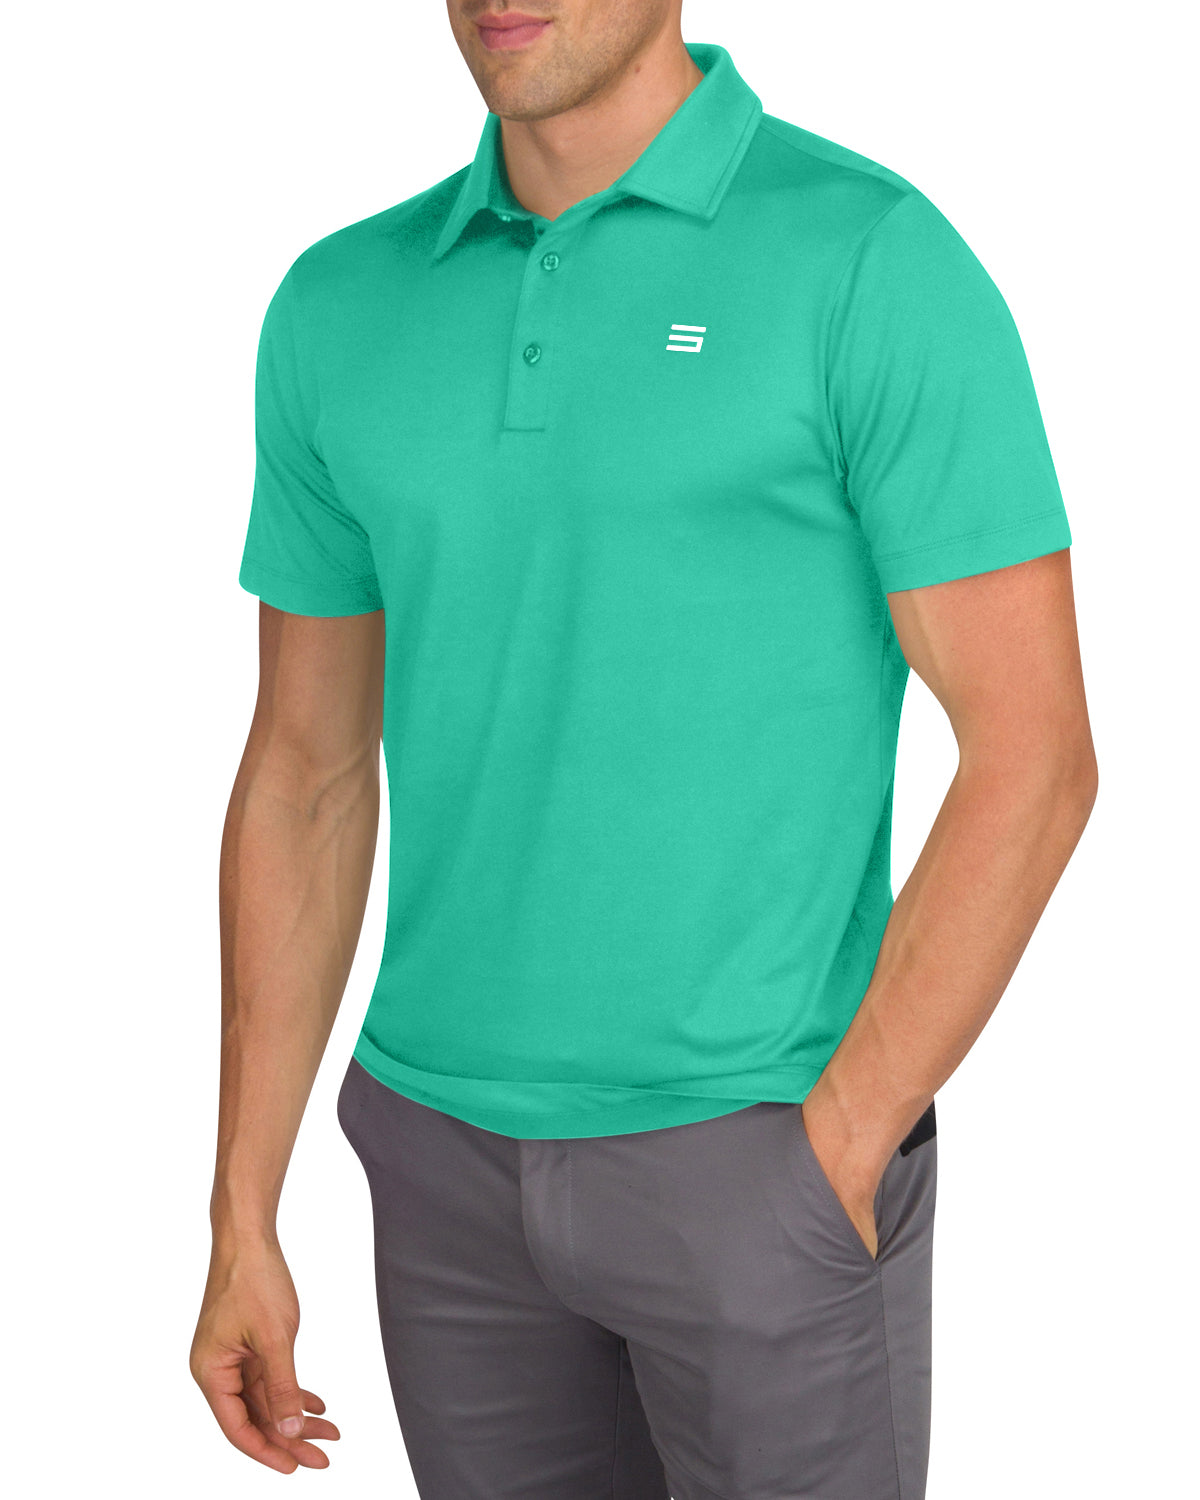 Untucked Golf Polo - The Perfect Length - Extreme Deal